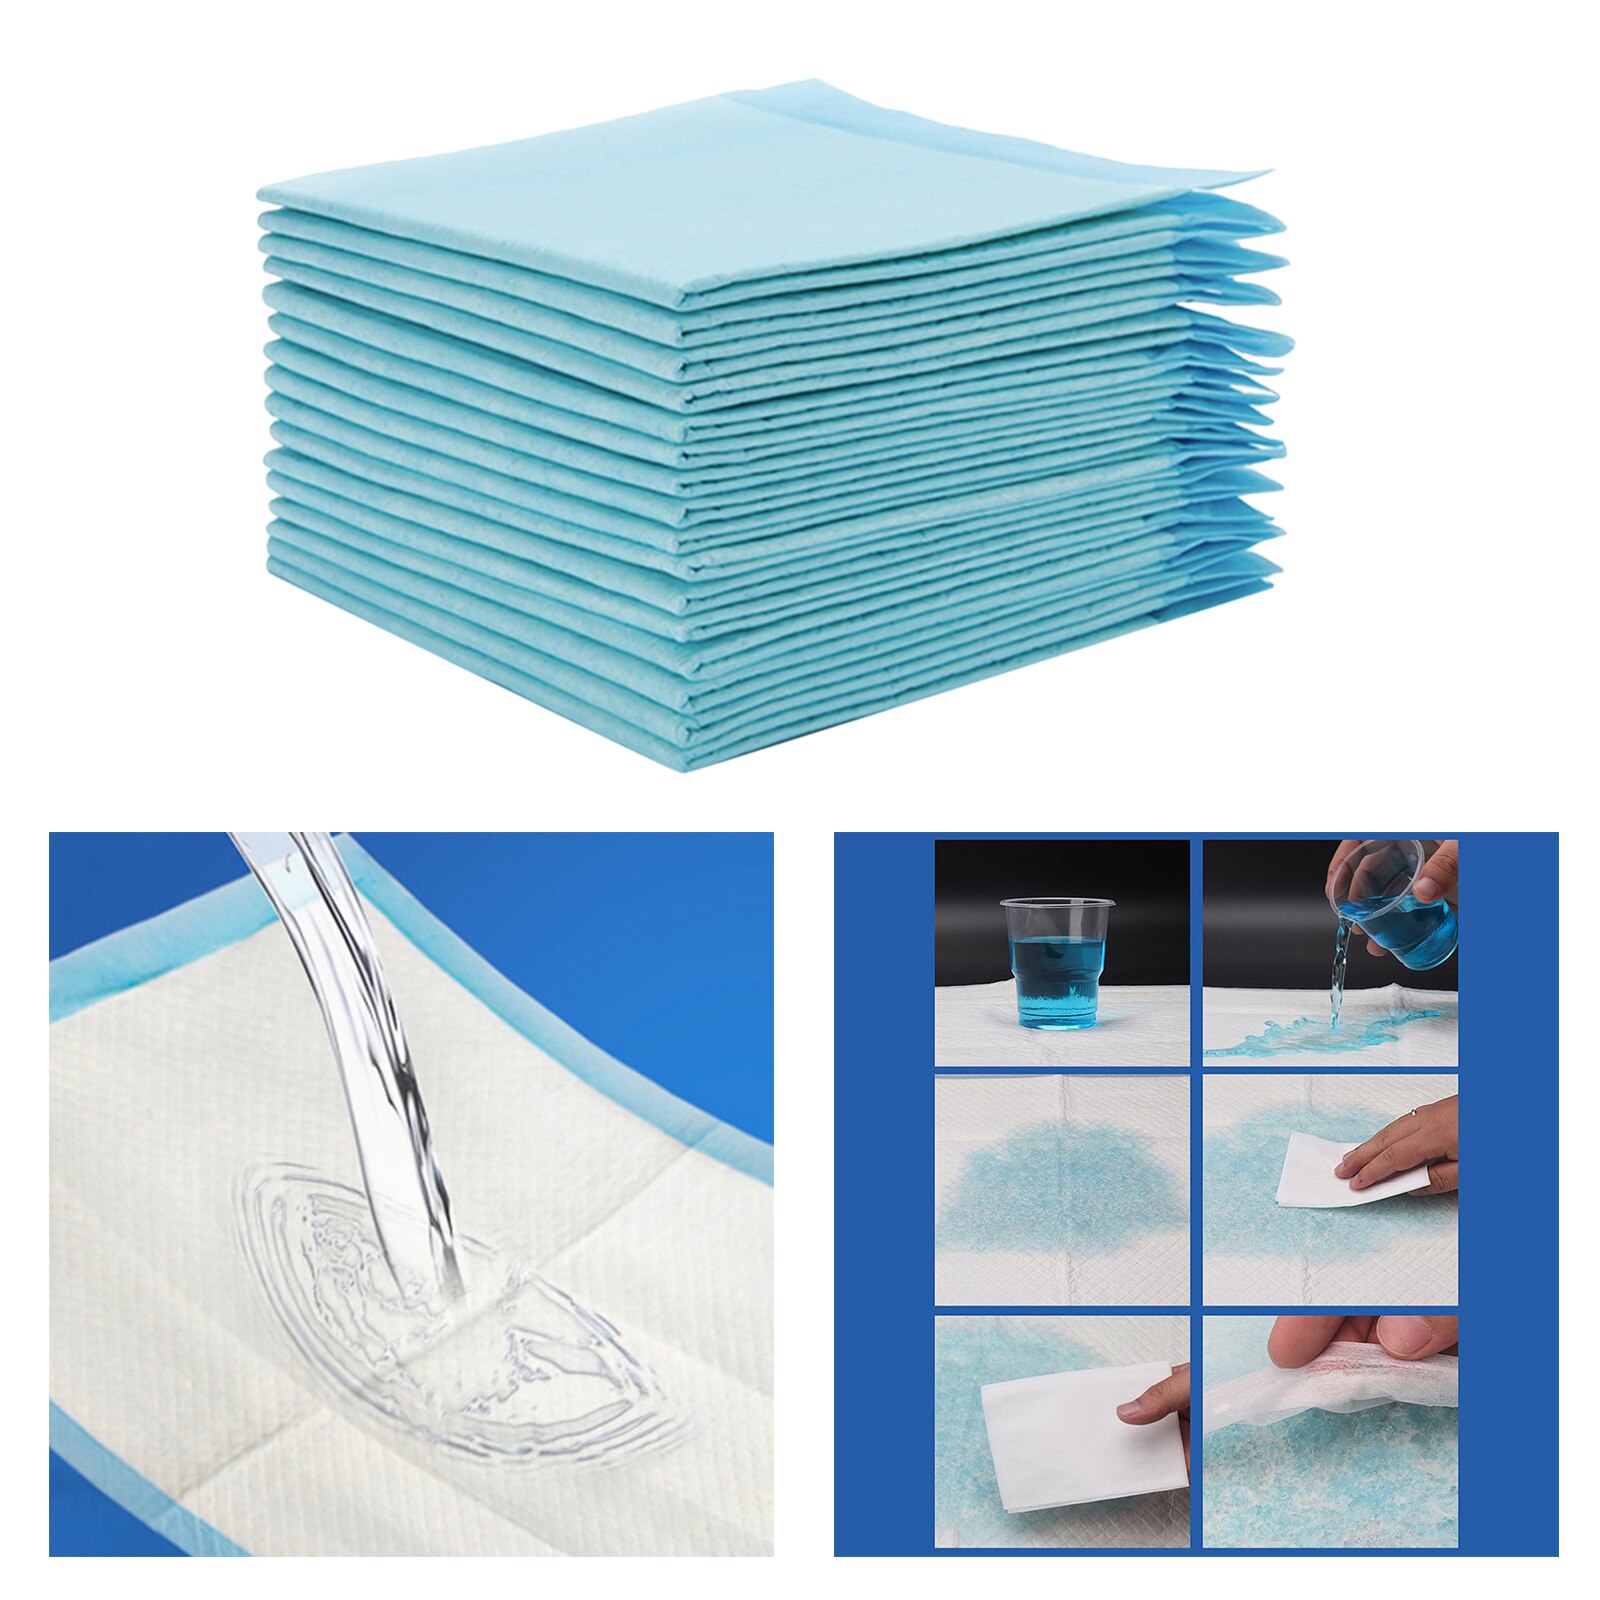 Disposable Changing Pad Liners (15 Pack) Super Soft, Ultra Absorbent Waterproof